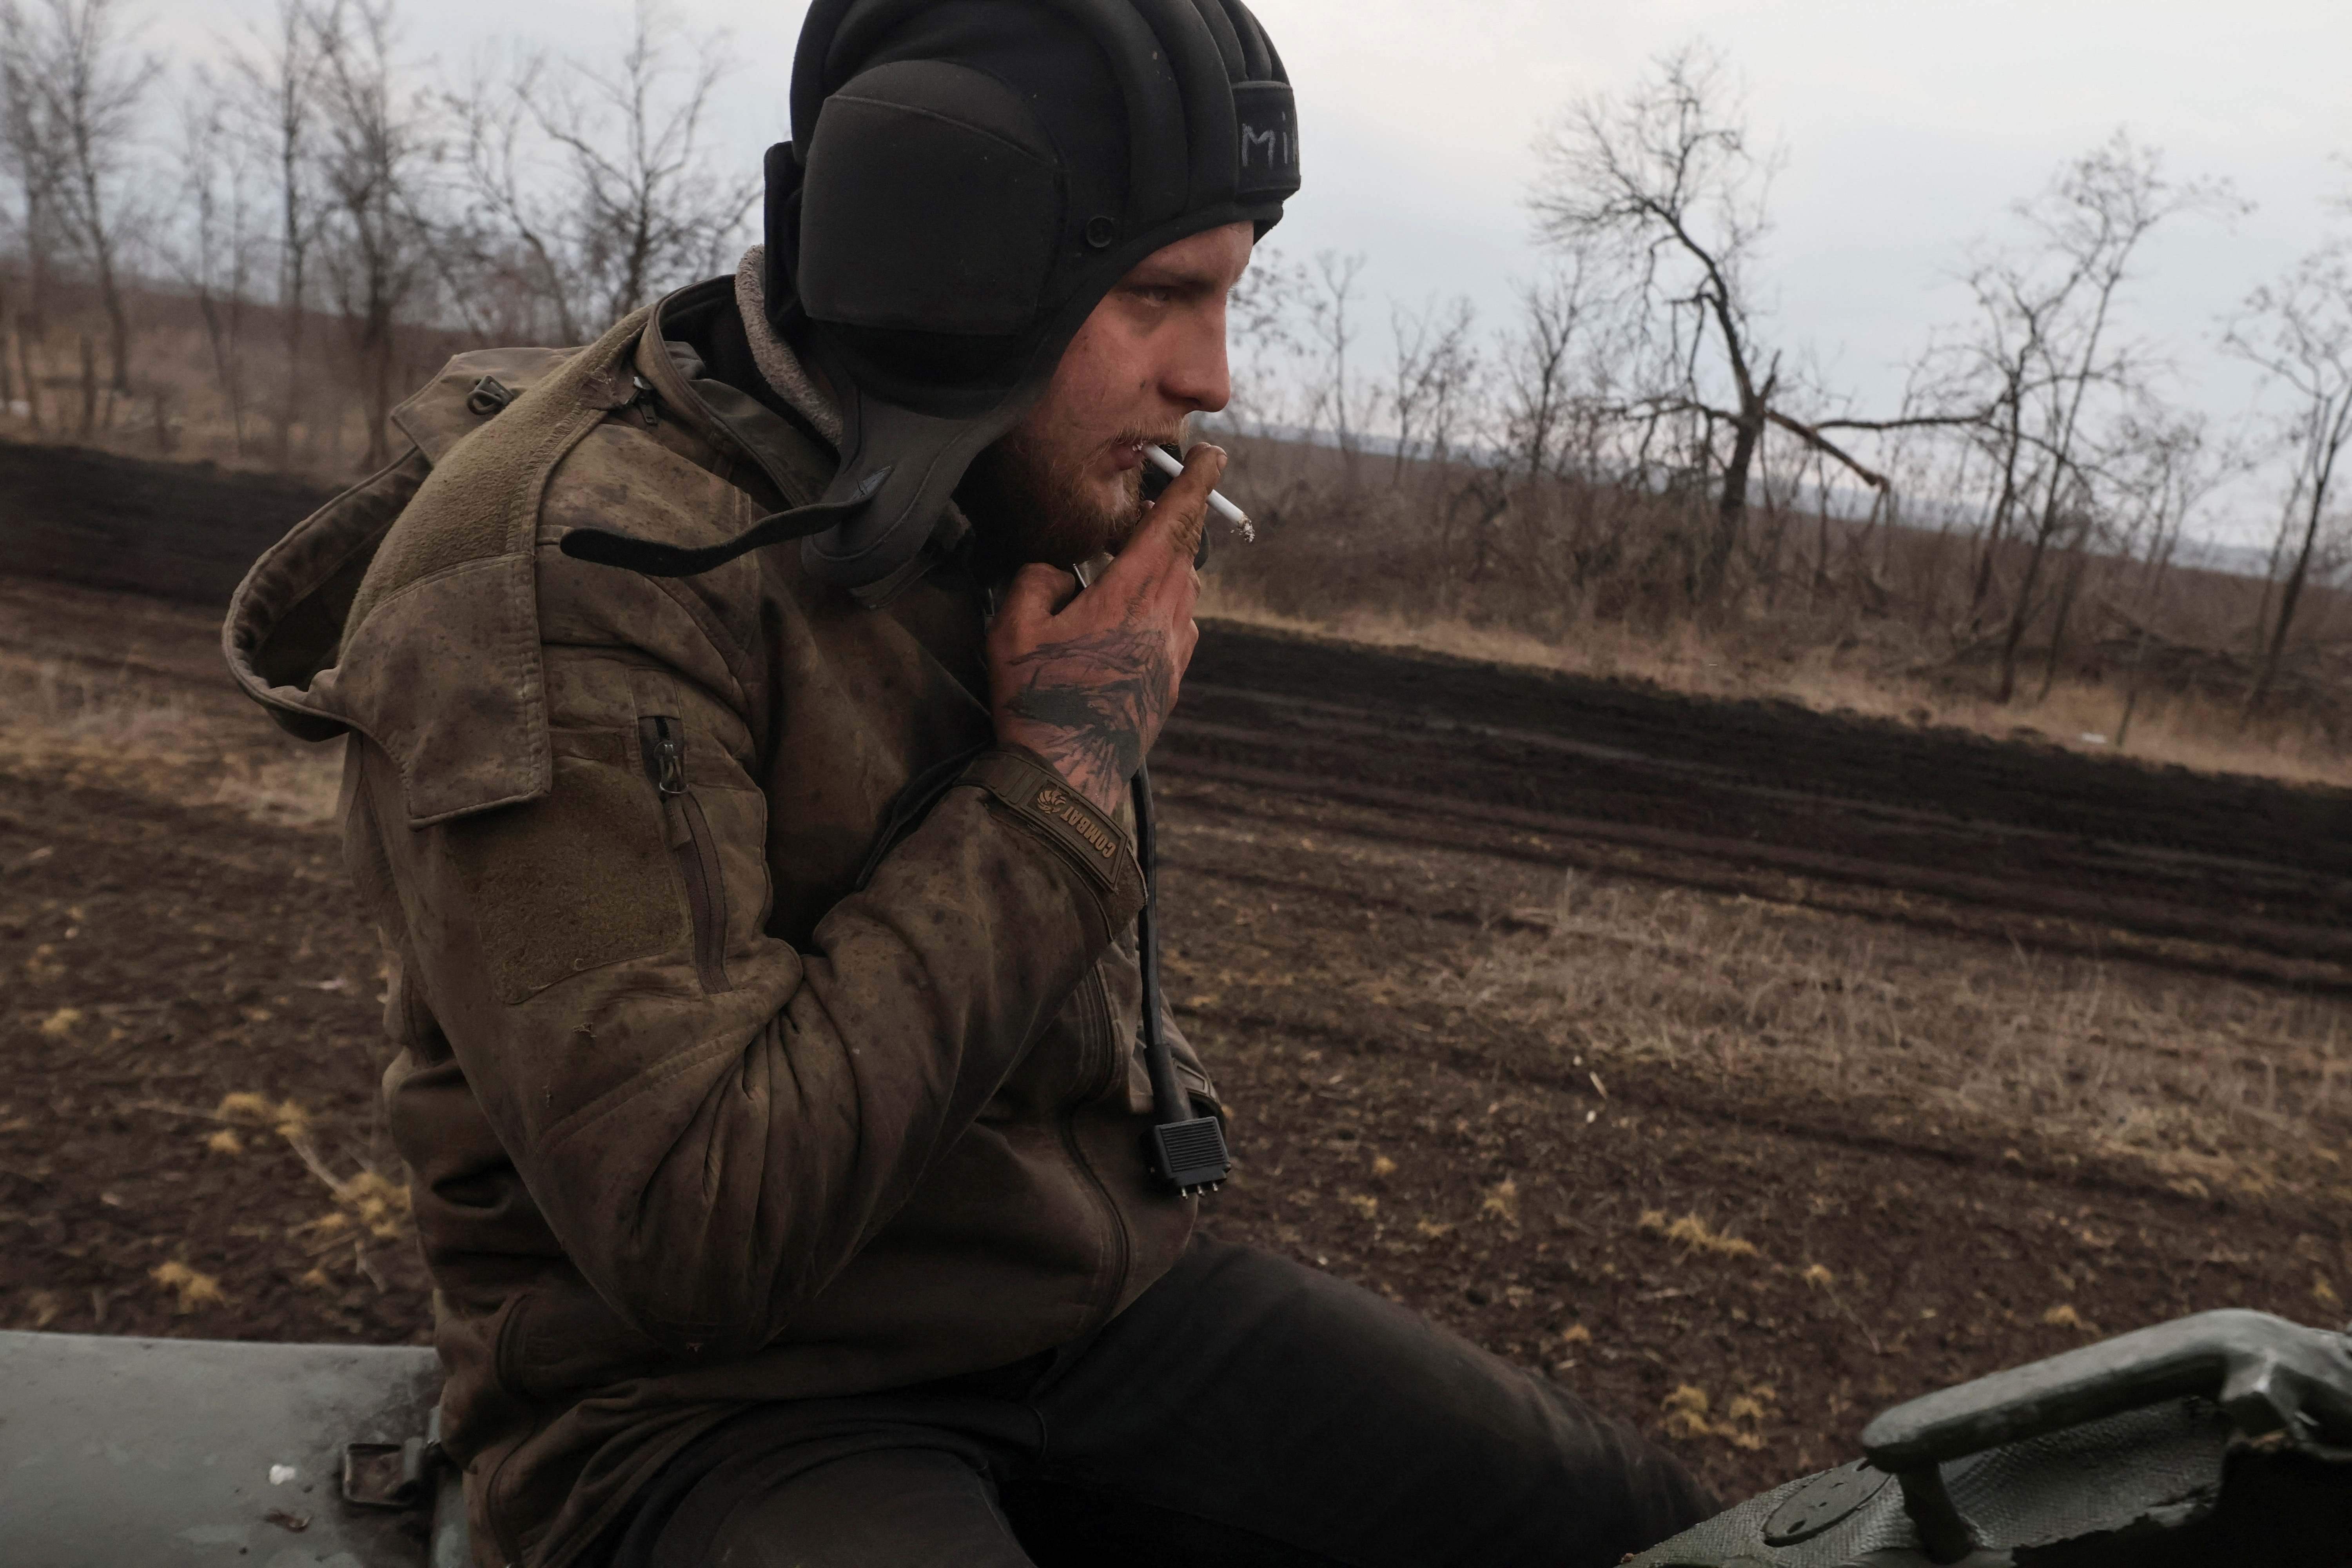 Ukrainian serviceman smokes as he rides on a tank near the frontline town of Bakhmut